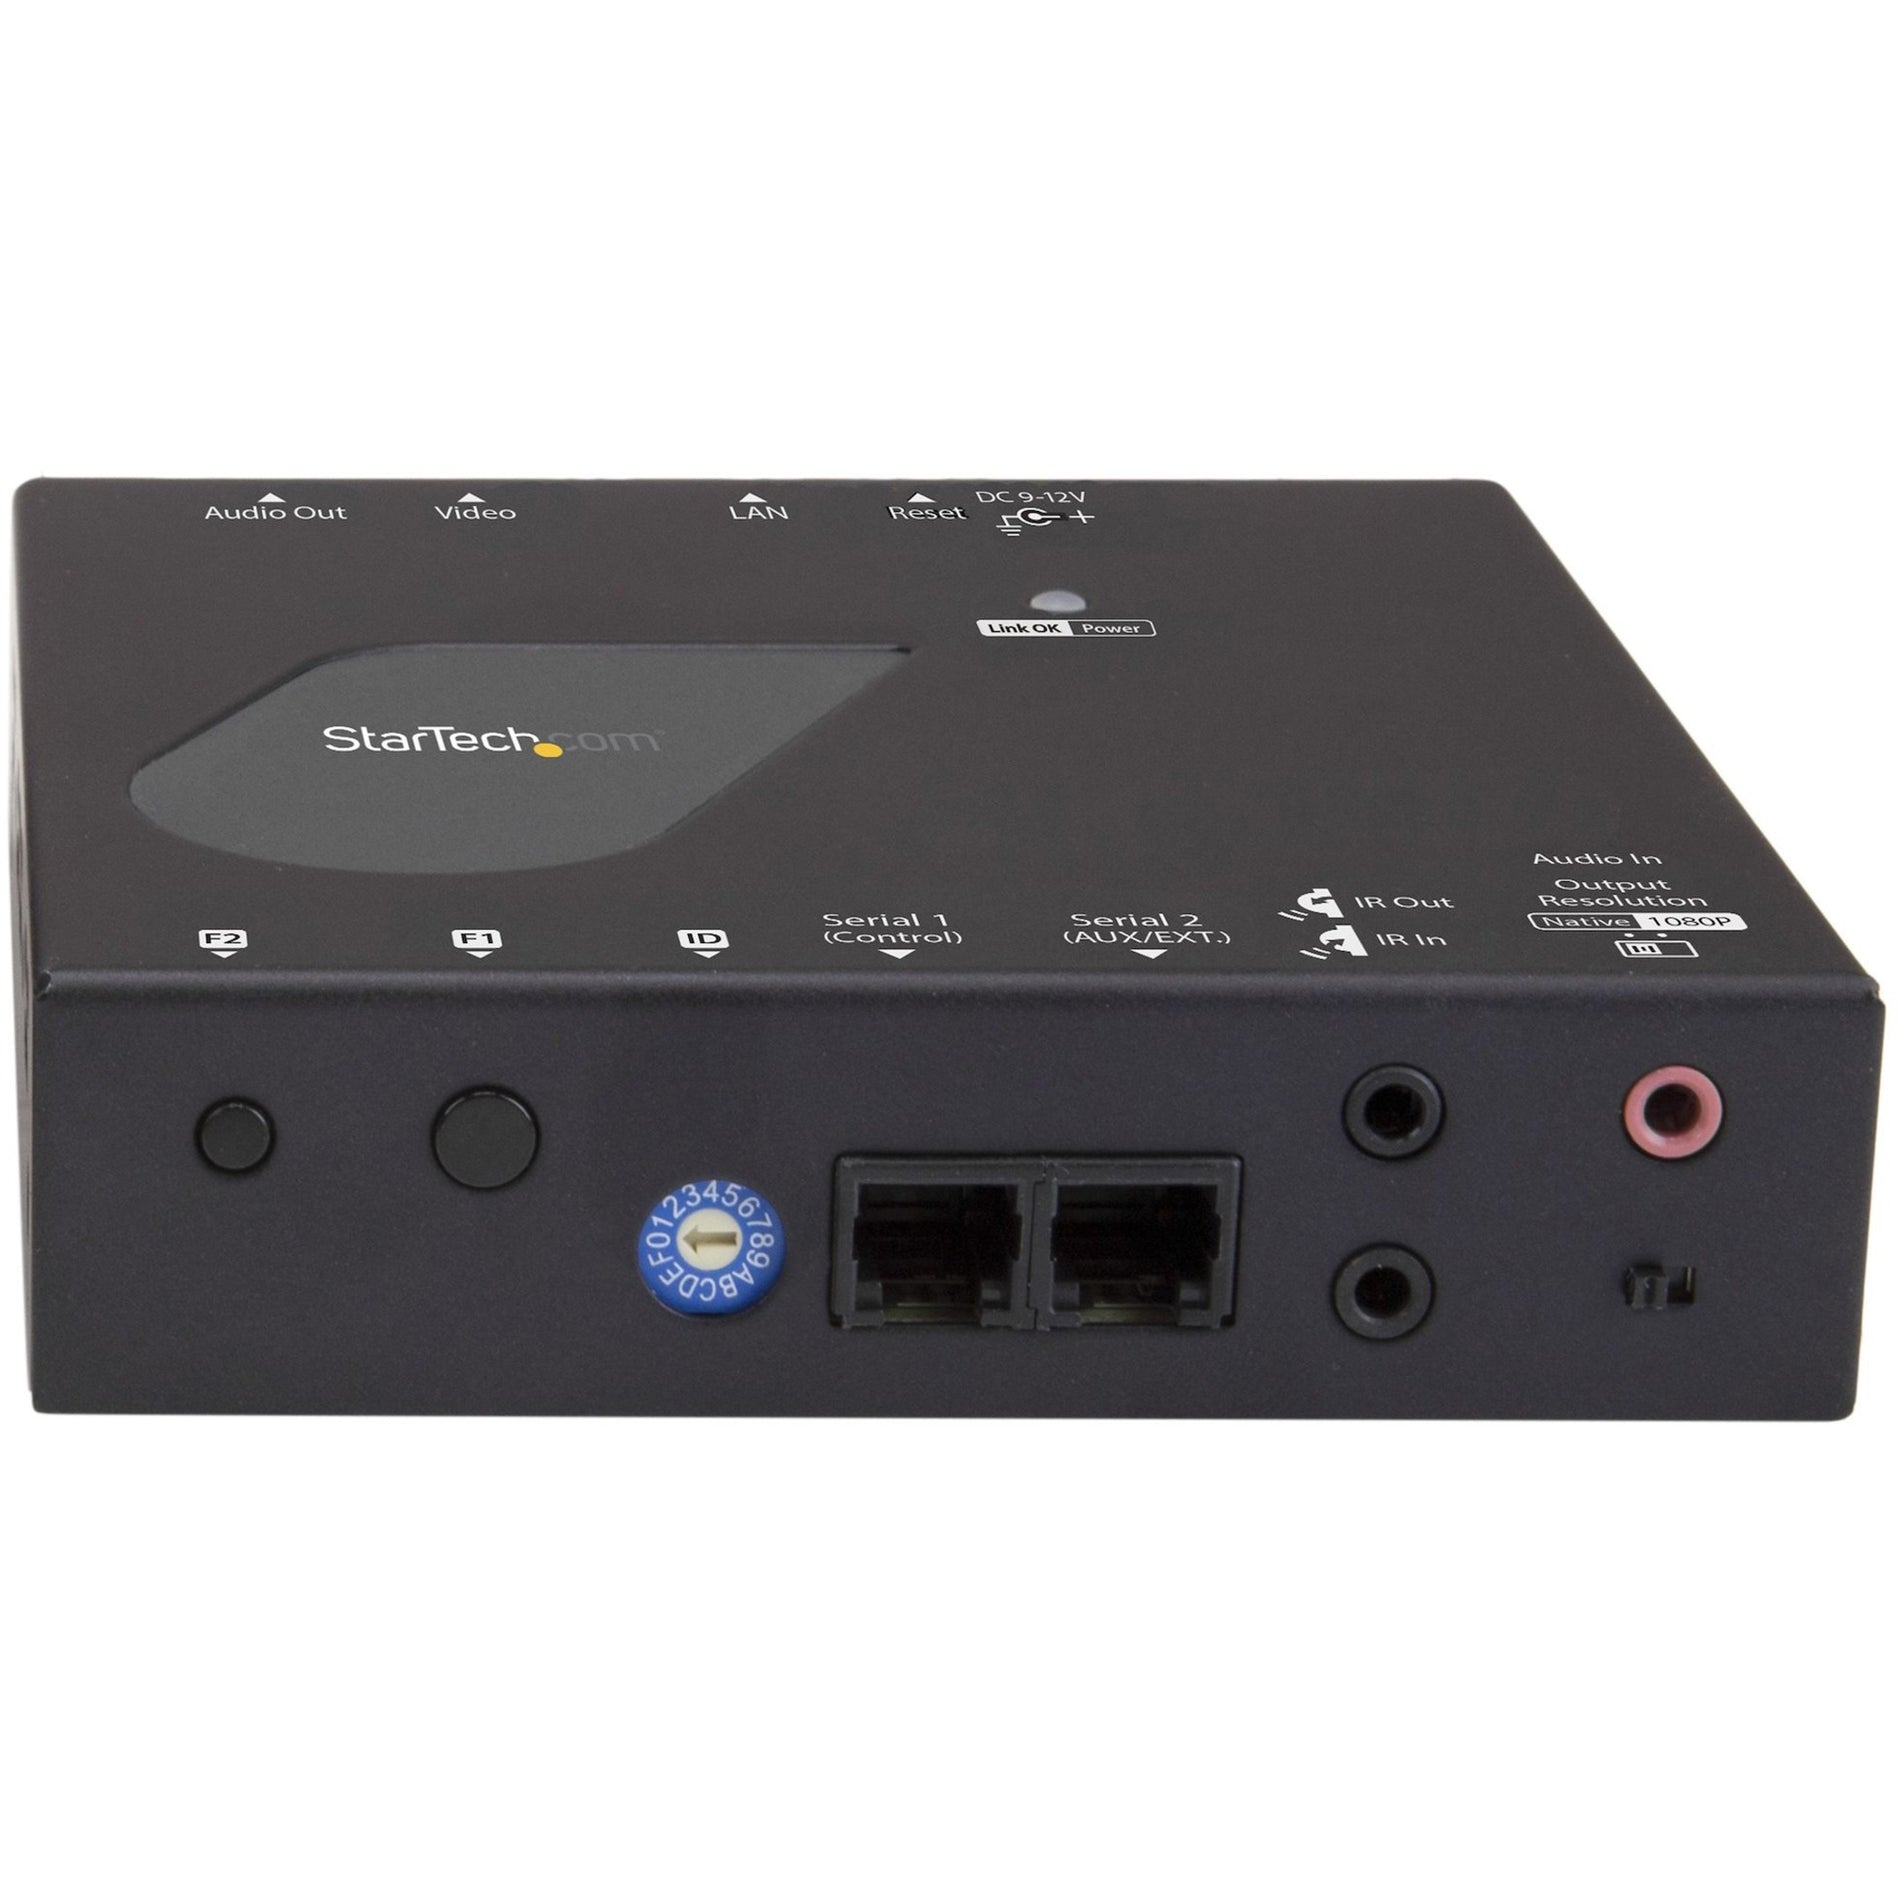 StarTech.com ST12MHDLAN4R 4K HDMI over IP Receiver for ST12MHDLAN4K, Video Over IP Extender with Video Wall Support